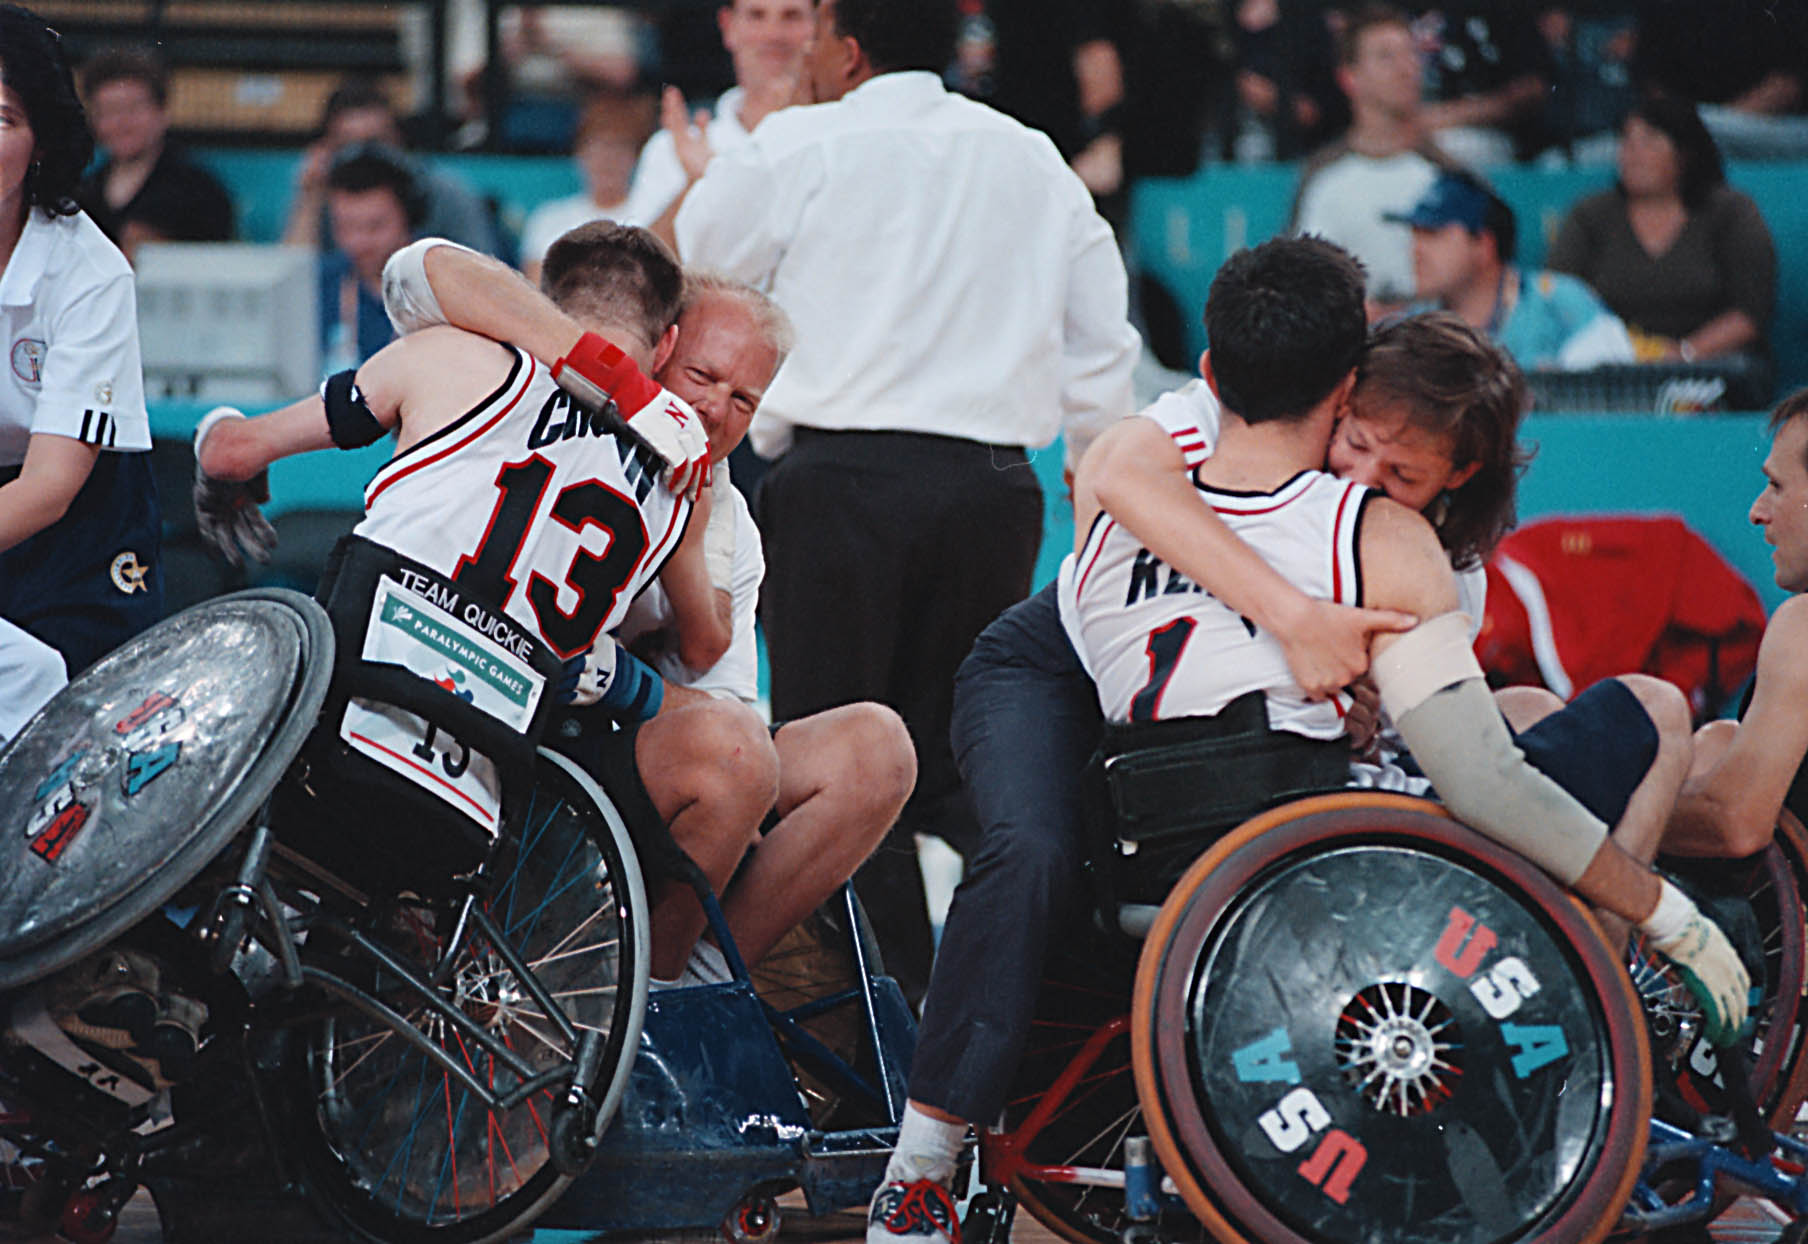 A picture of a man in a wheelchair and a girl celebrating a victory.